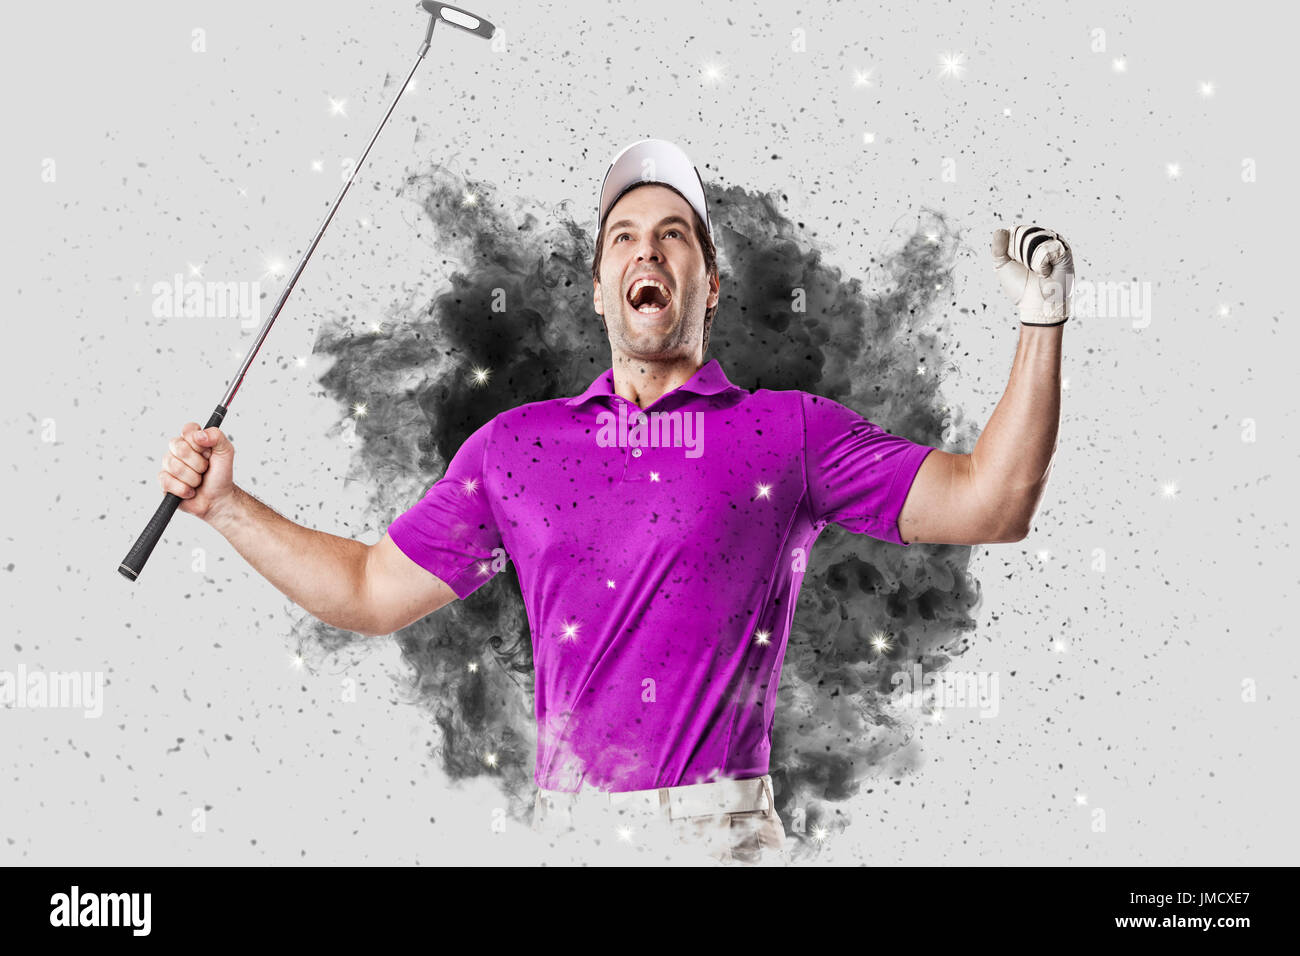 Golf Player with a pink uniform coming out of a blast of smoke . Stock Photo